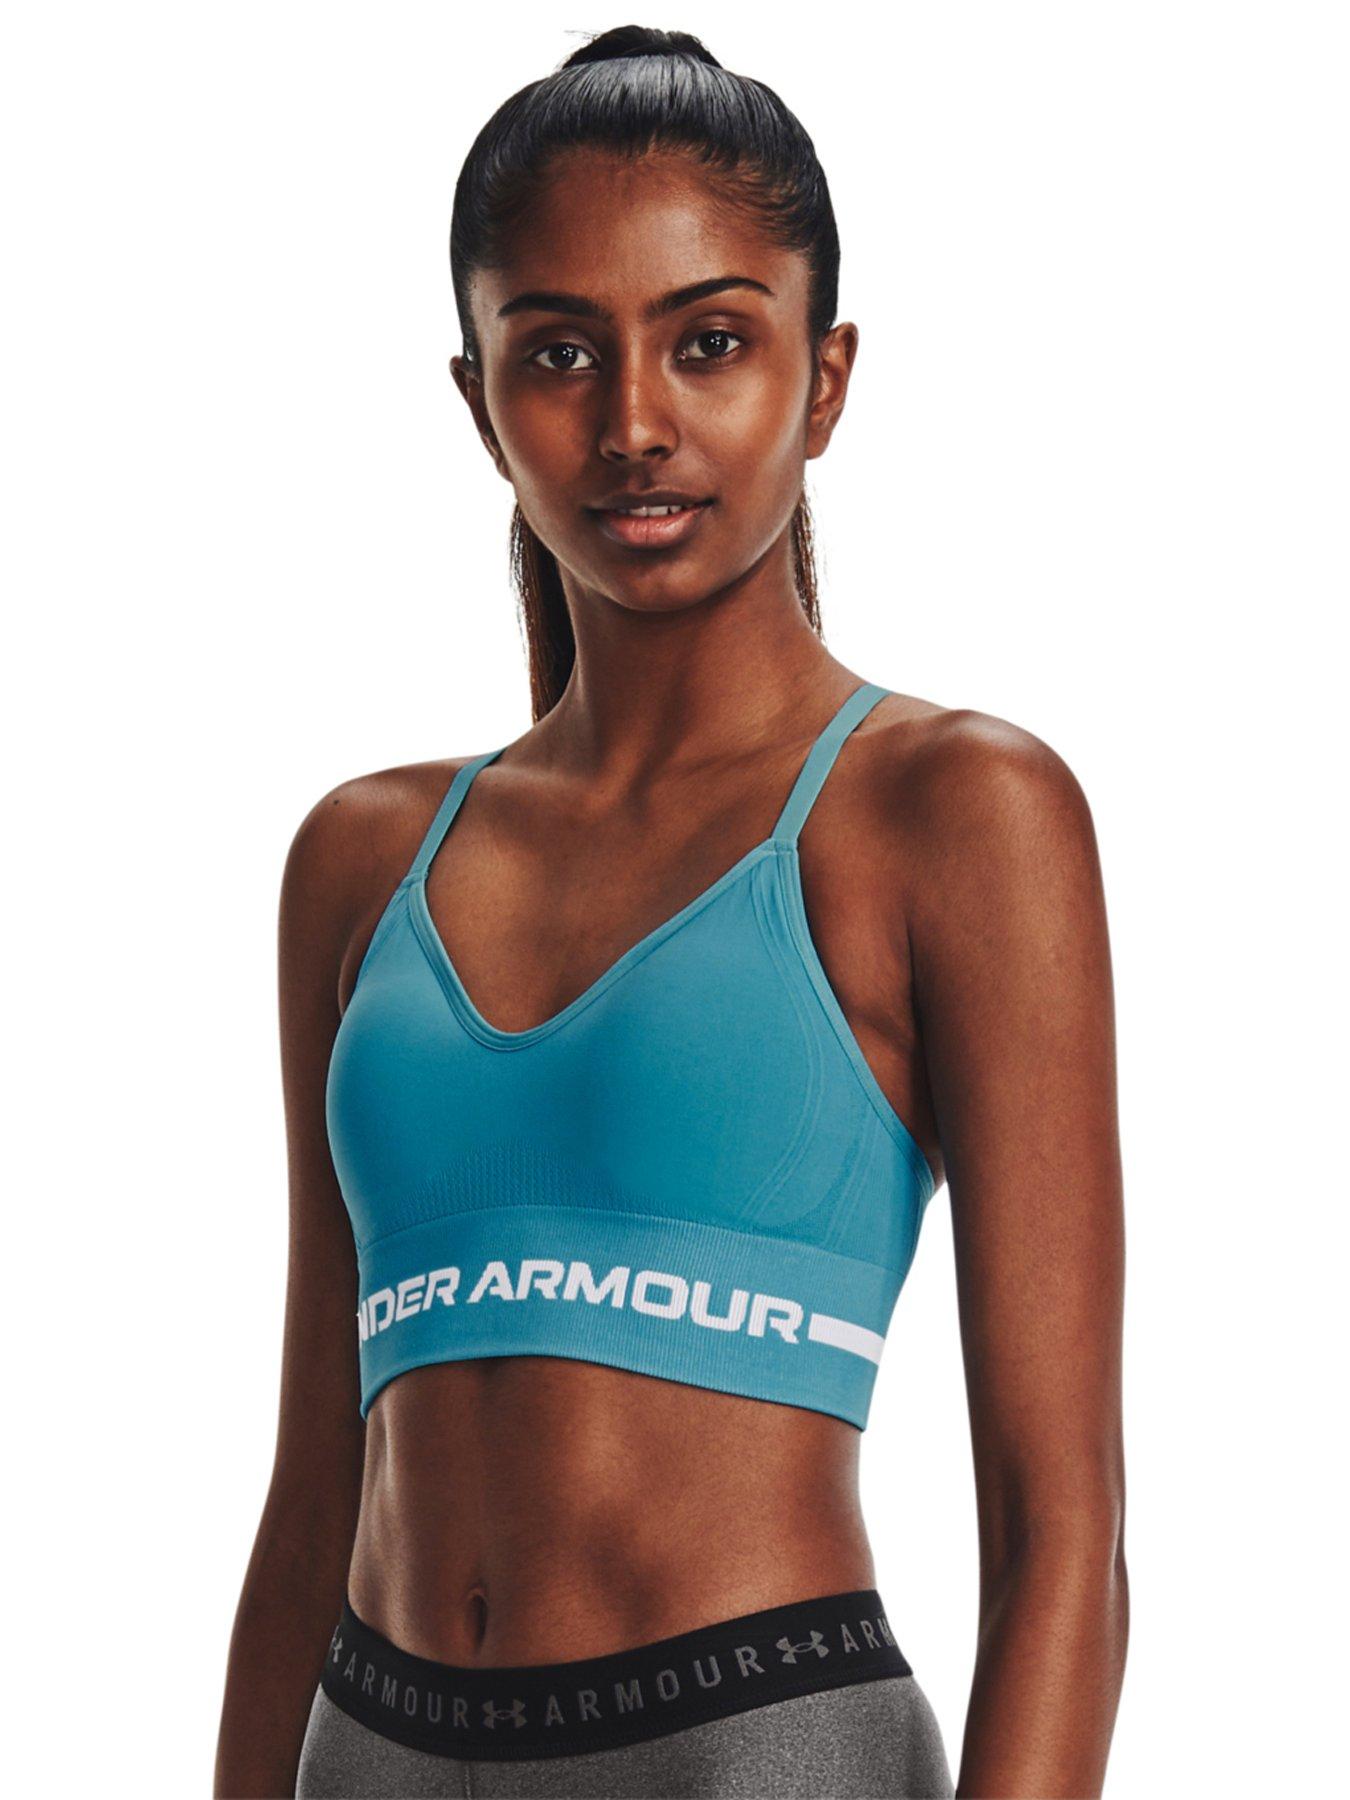 Under Armour sports bra size Small blue green reversible - $6 (85